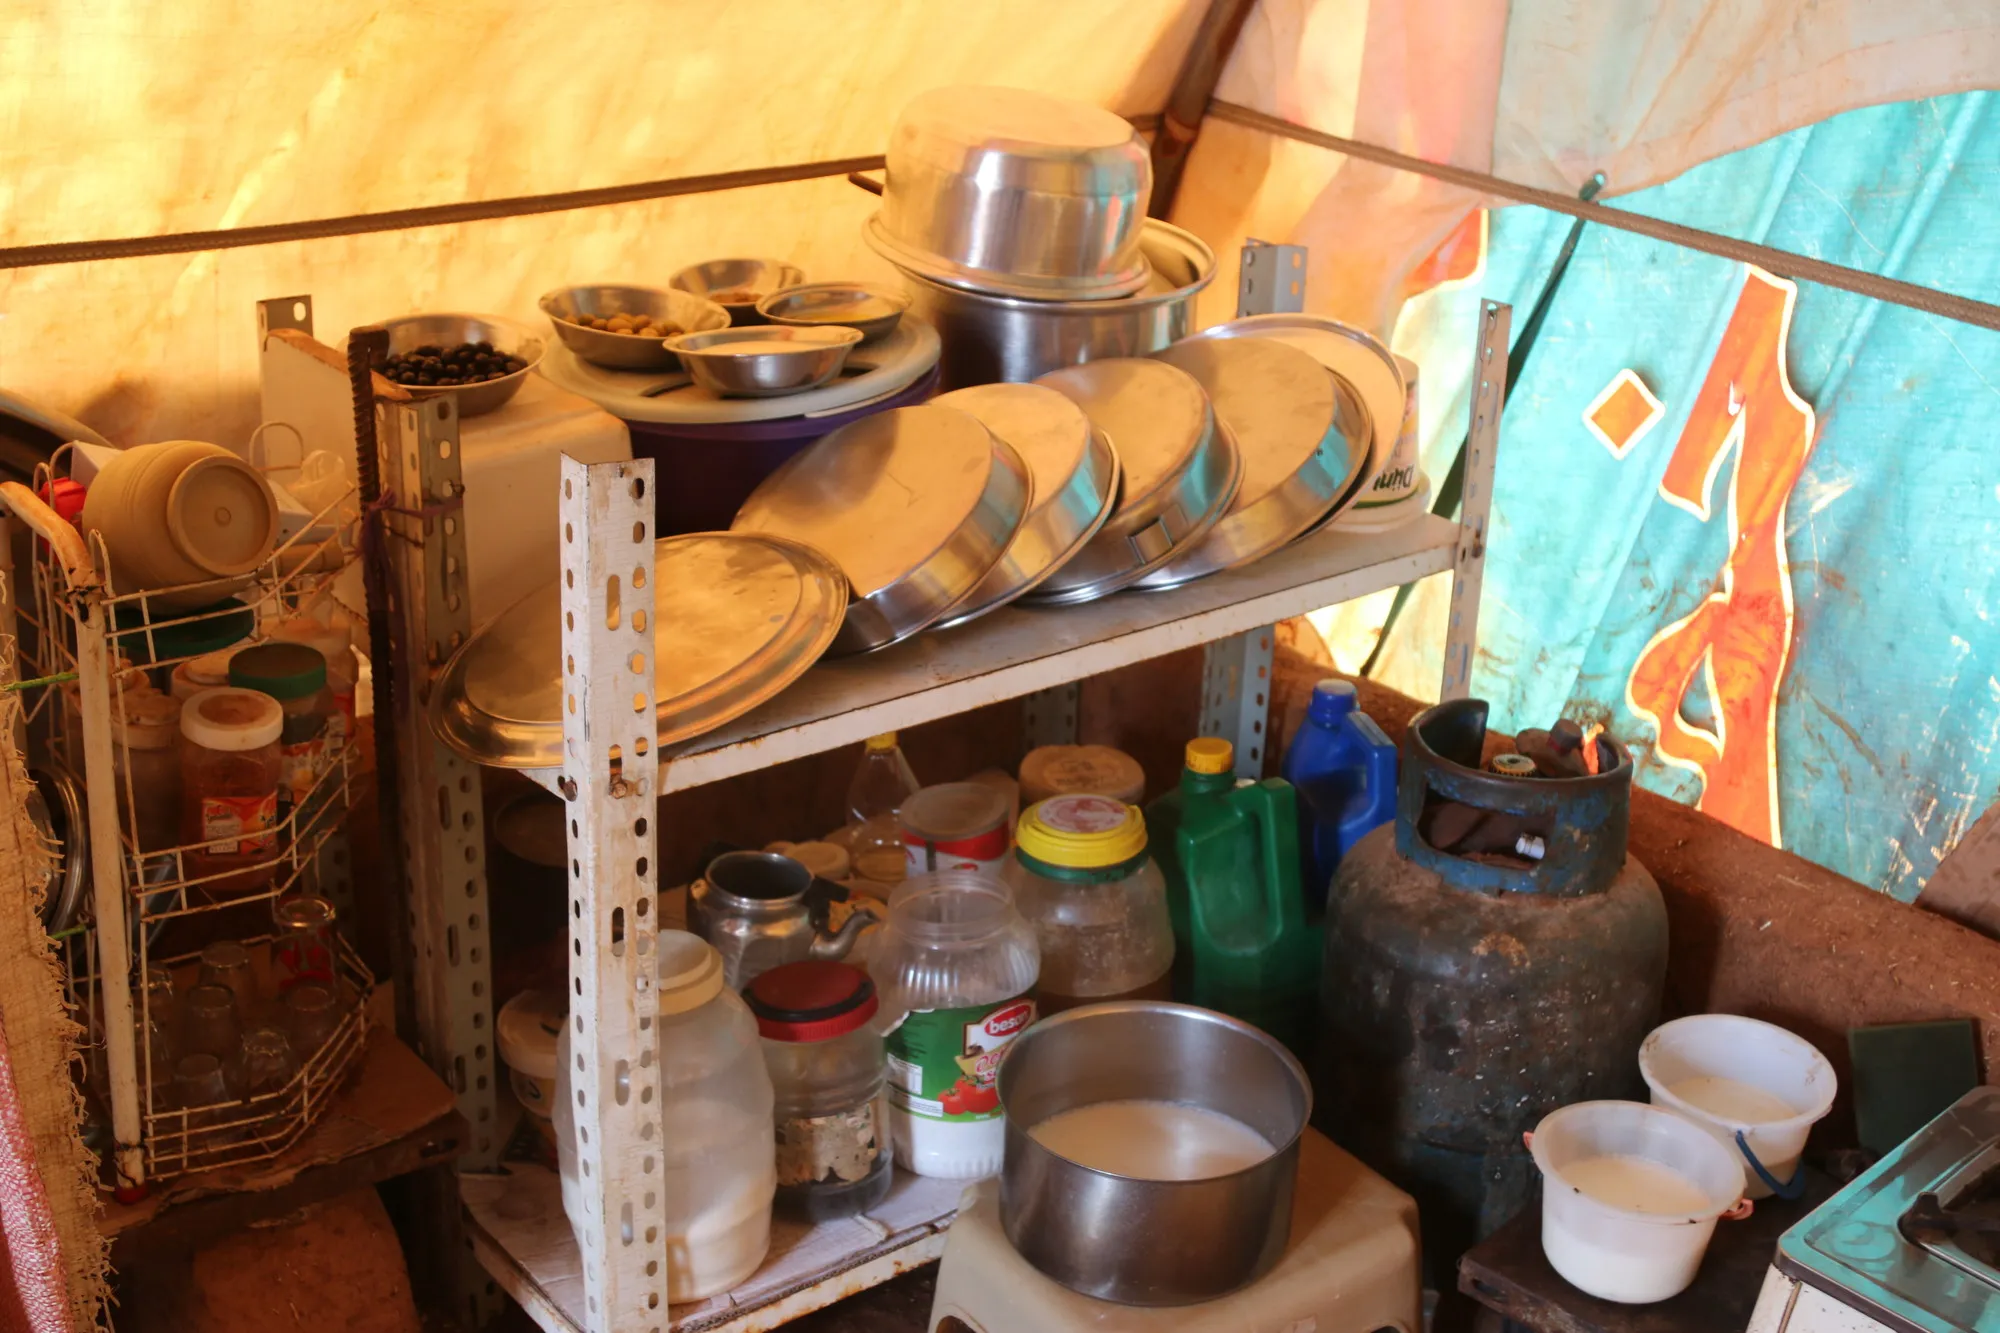 A few of the belongings in Amira’s tent that are helping her family survive.